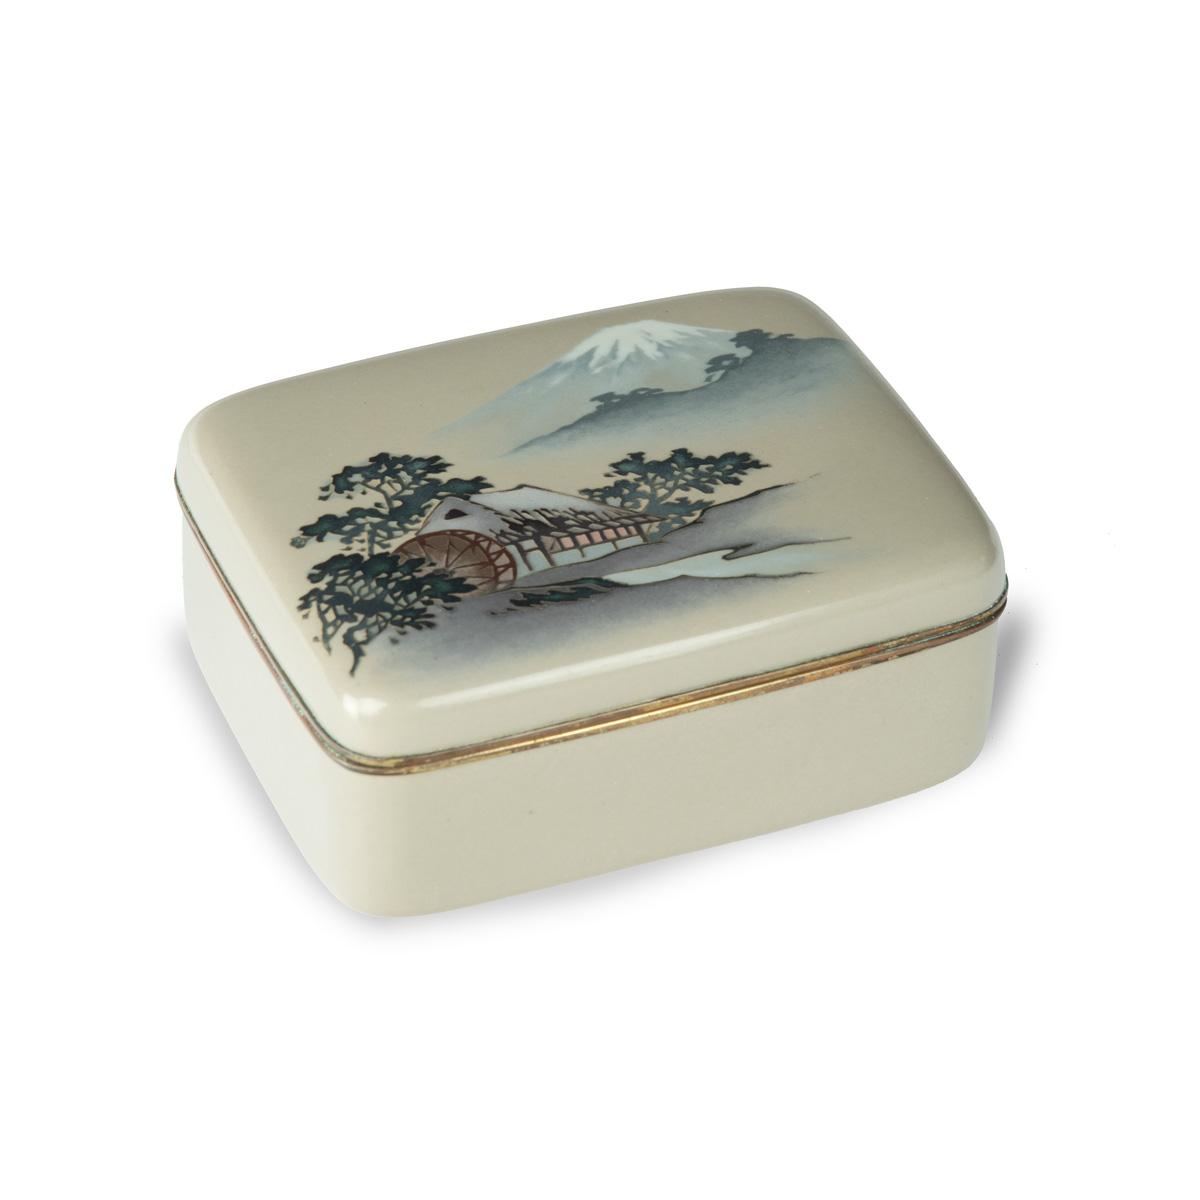 A Taisho period cloisonné box and cover with a watermill and Mount Fuji